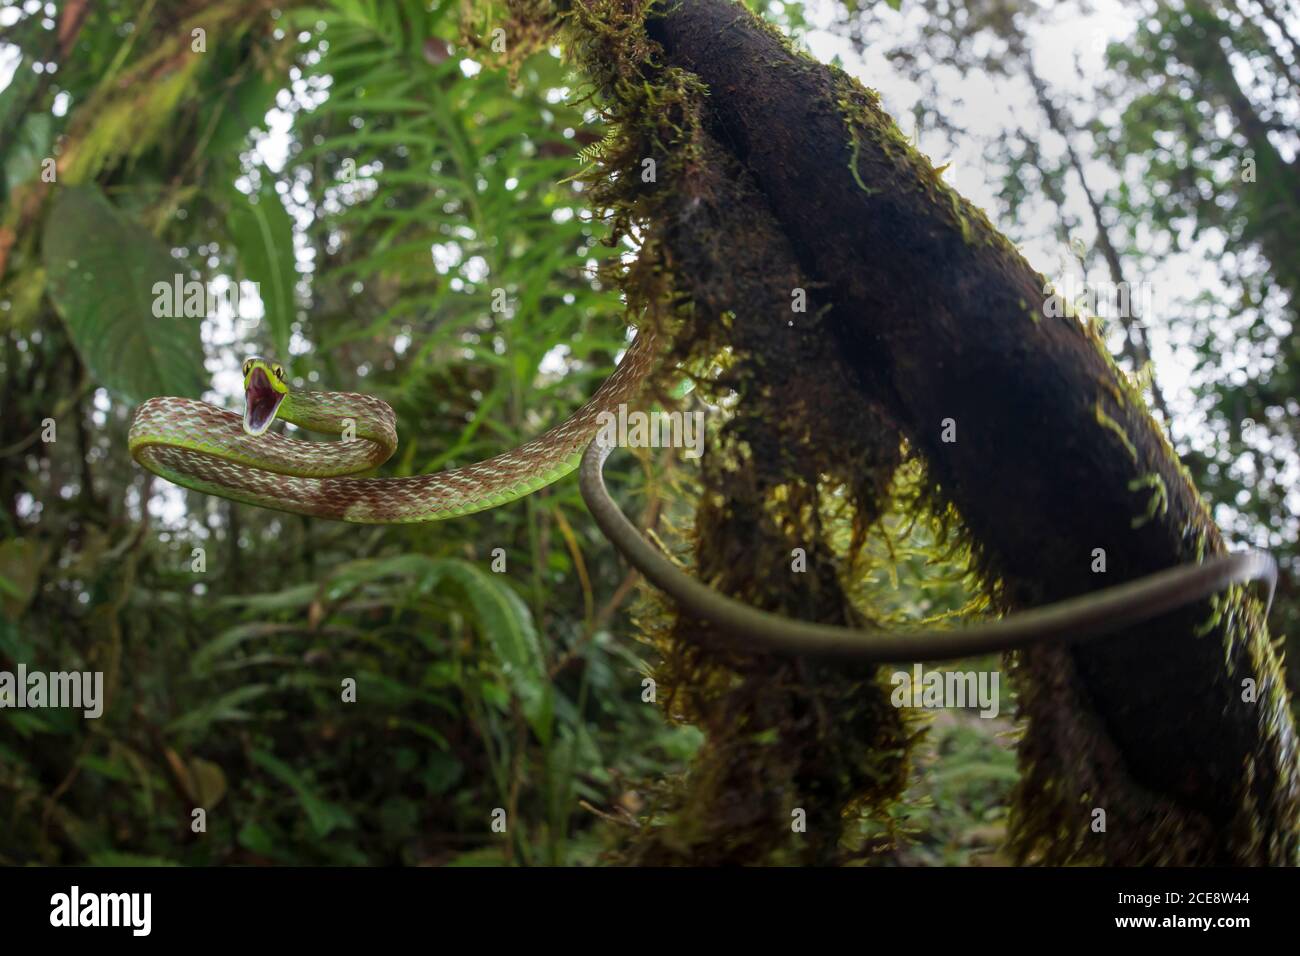 Low angle of Ahaetulla nasuta hissing angrily while hanging from mossy tree in woods Stock Photo